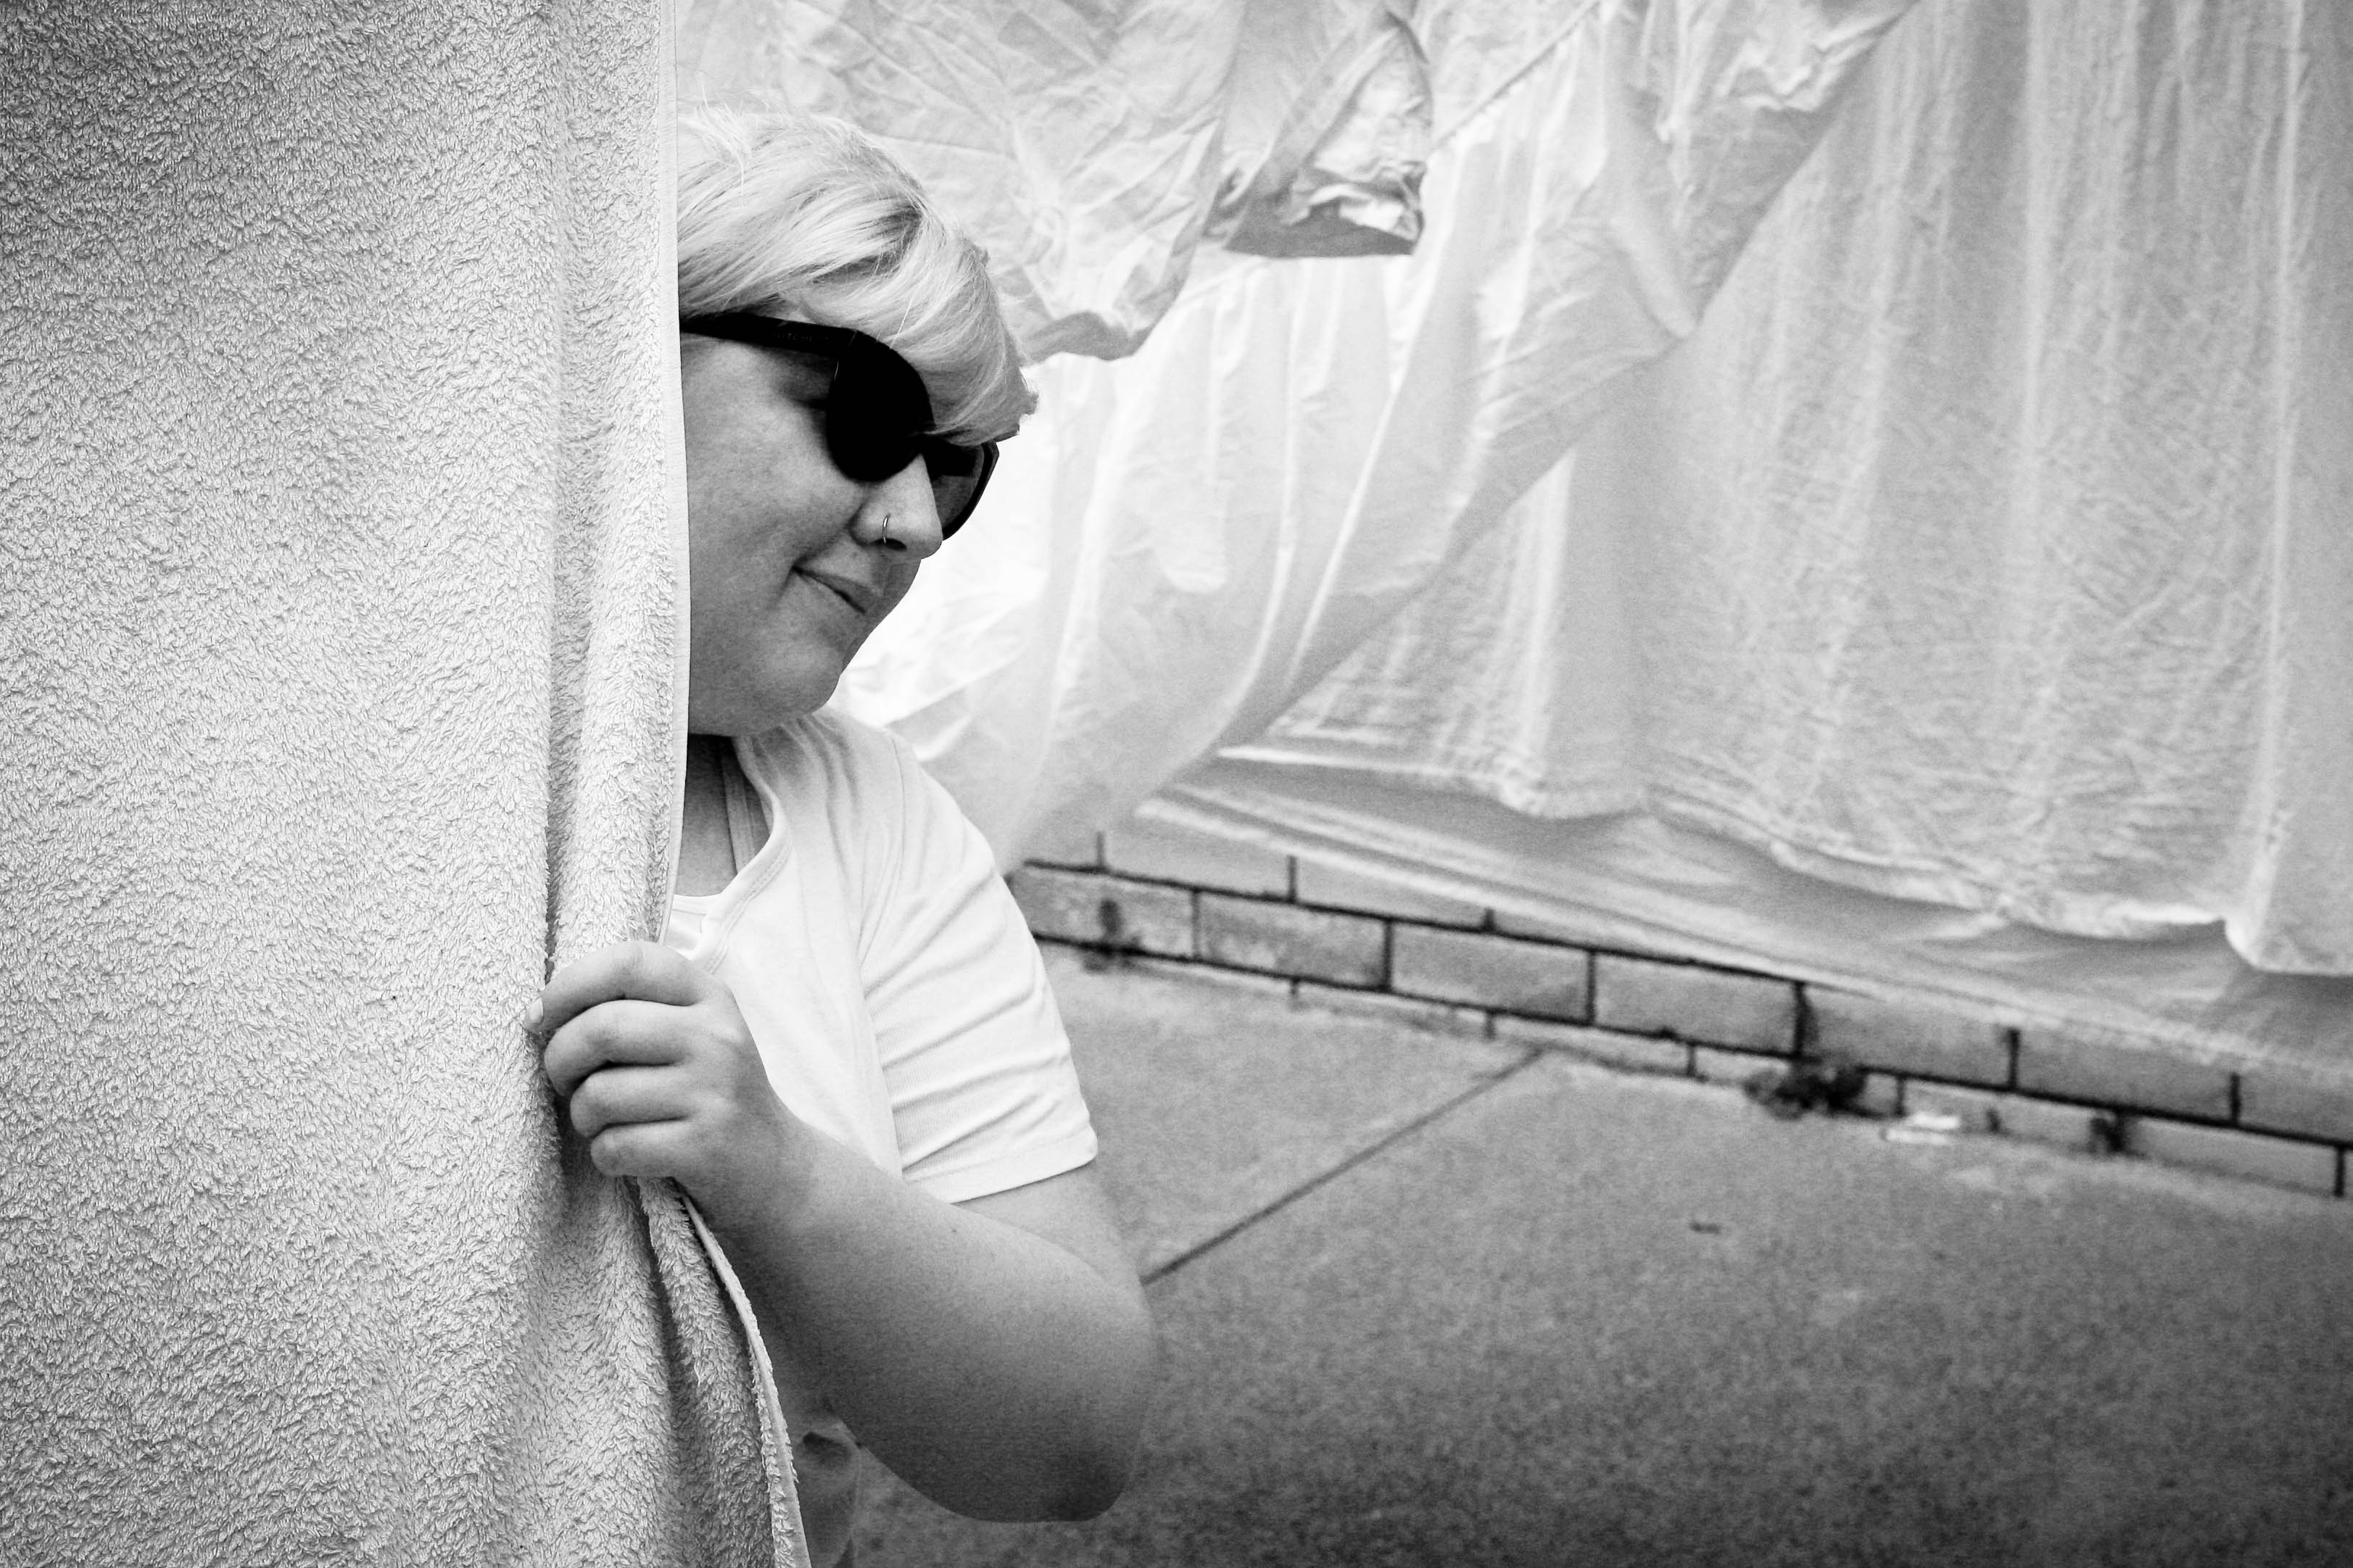 A black and white photo of me wearing sunglasses and peering around a towel on the line.